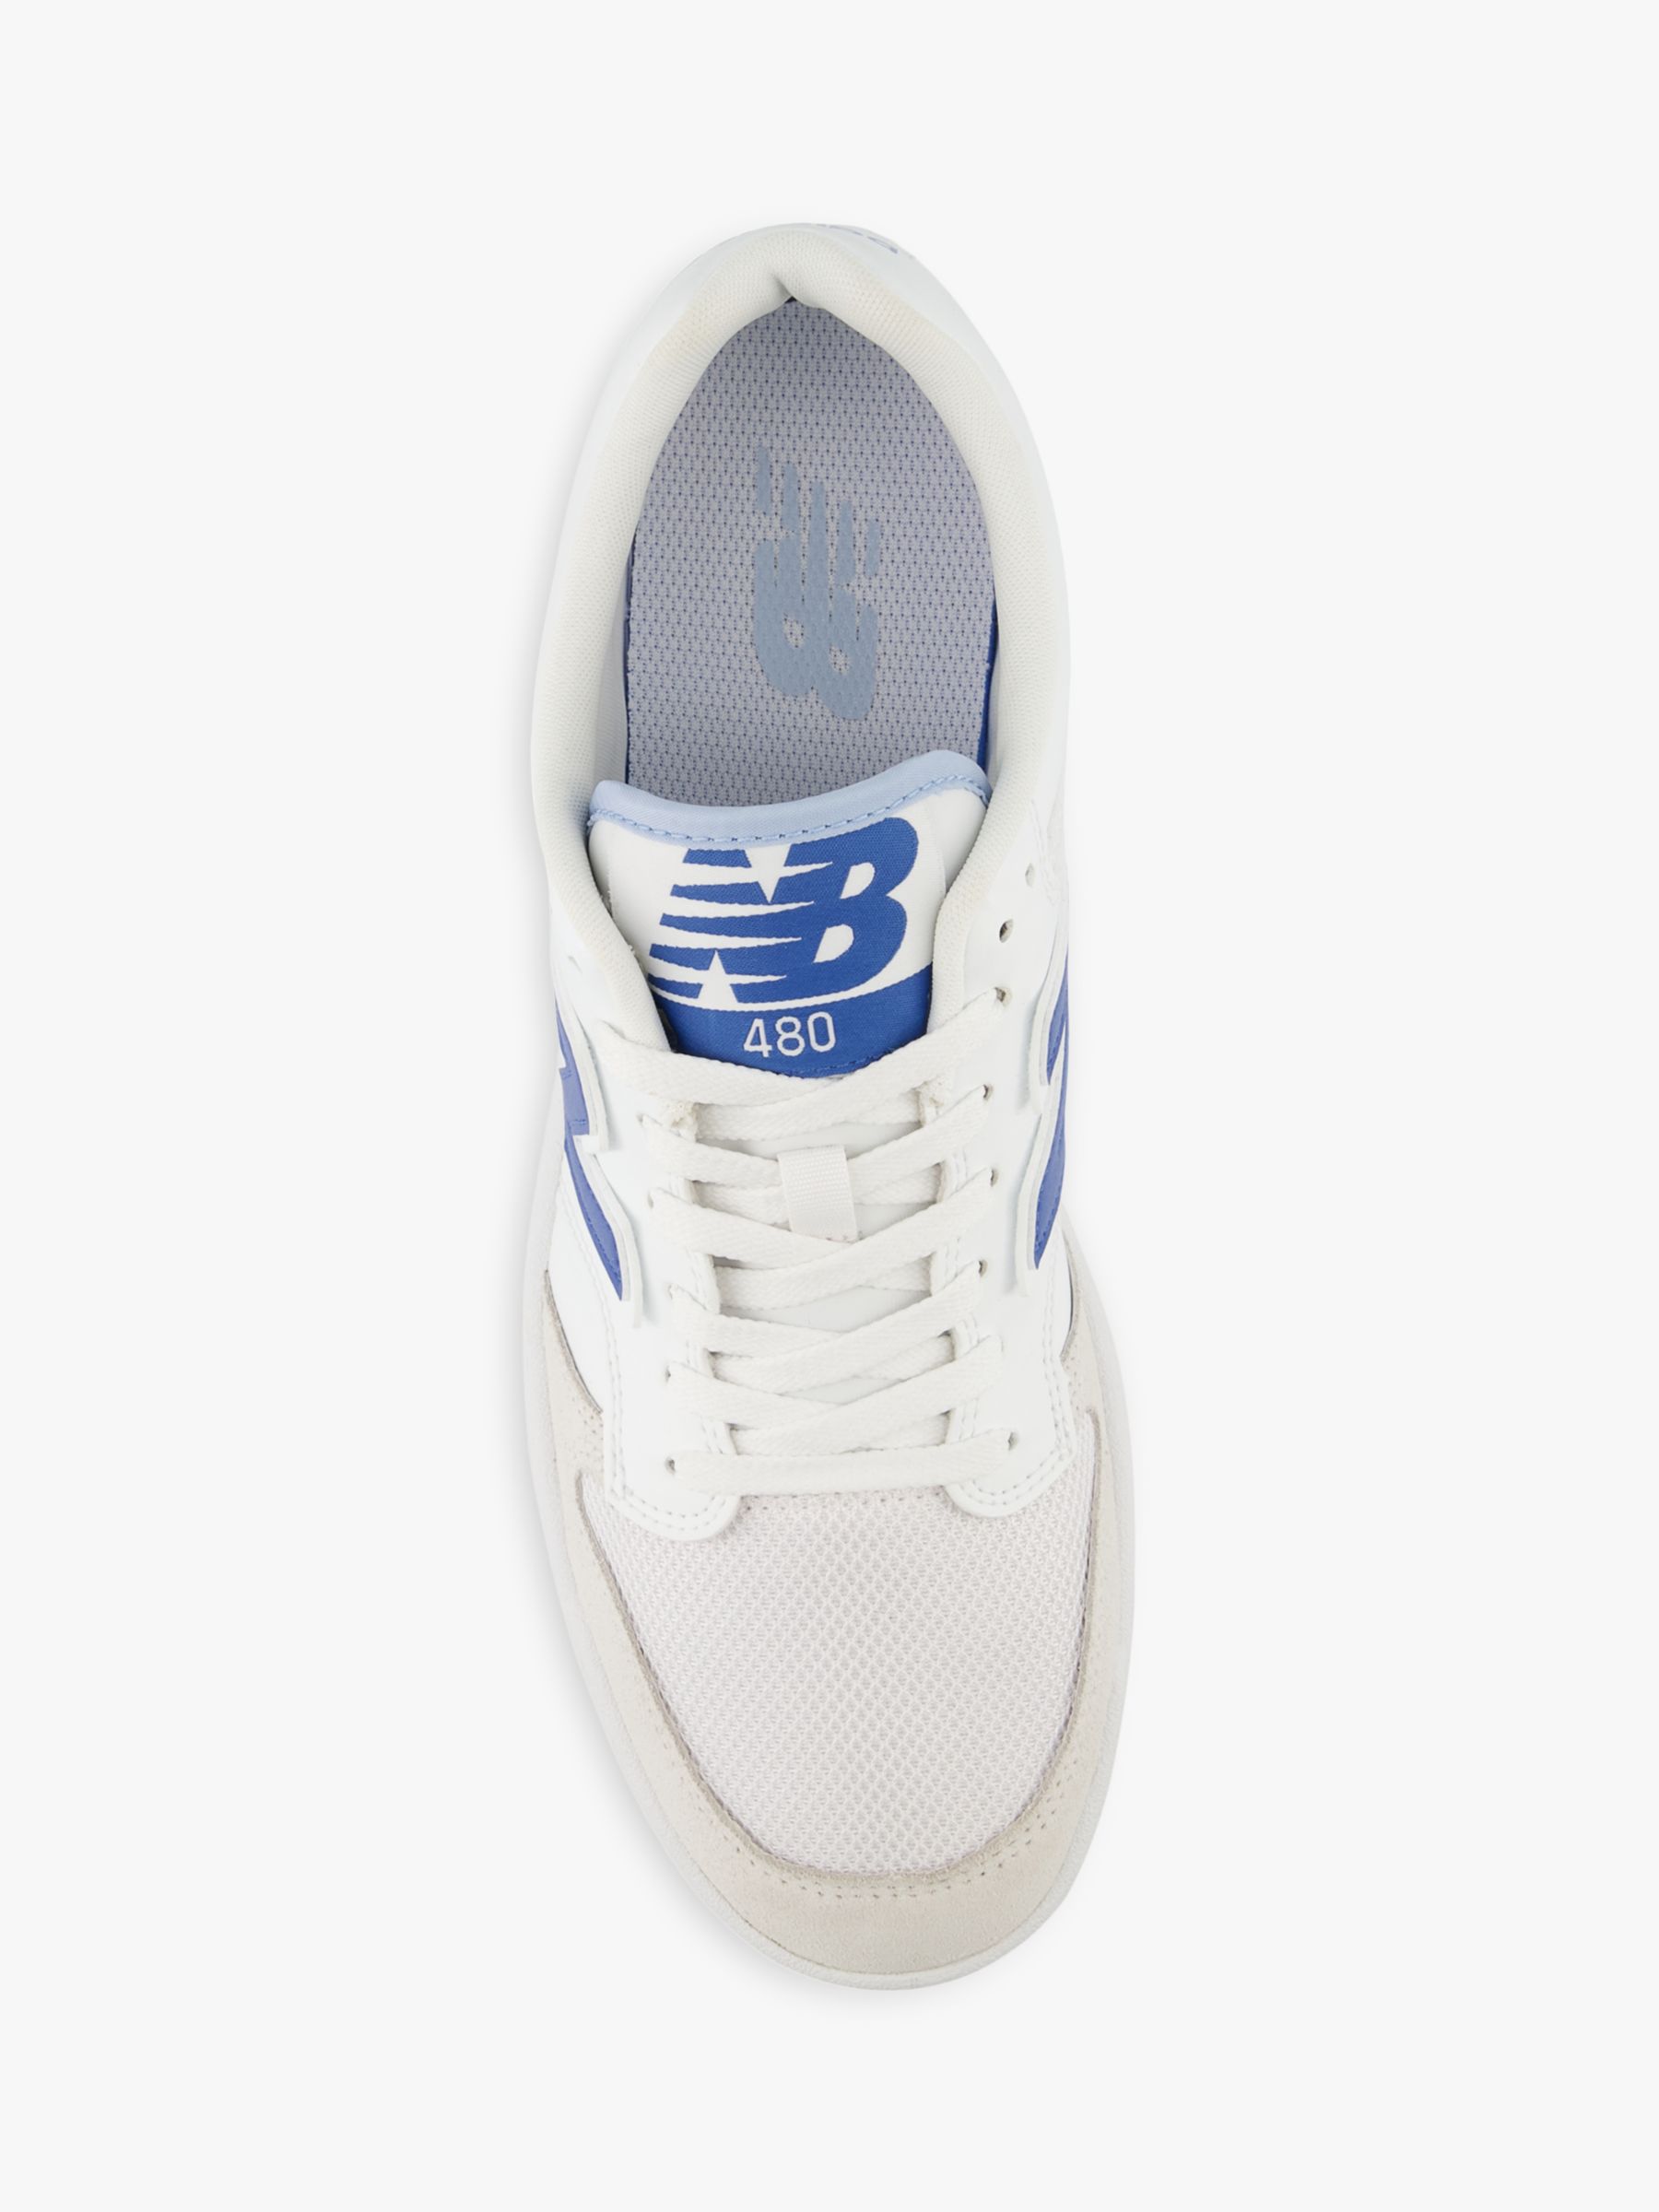 New Balance 480 Leather Trainers, White/Blue at John Lewis & Partners